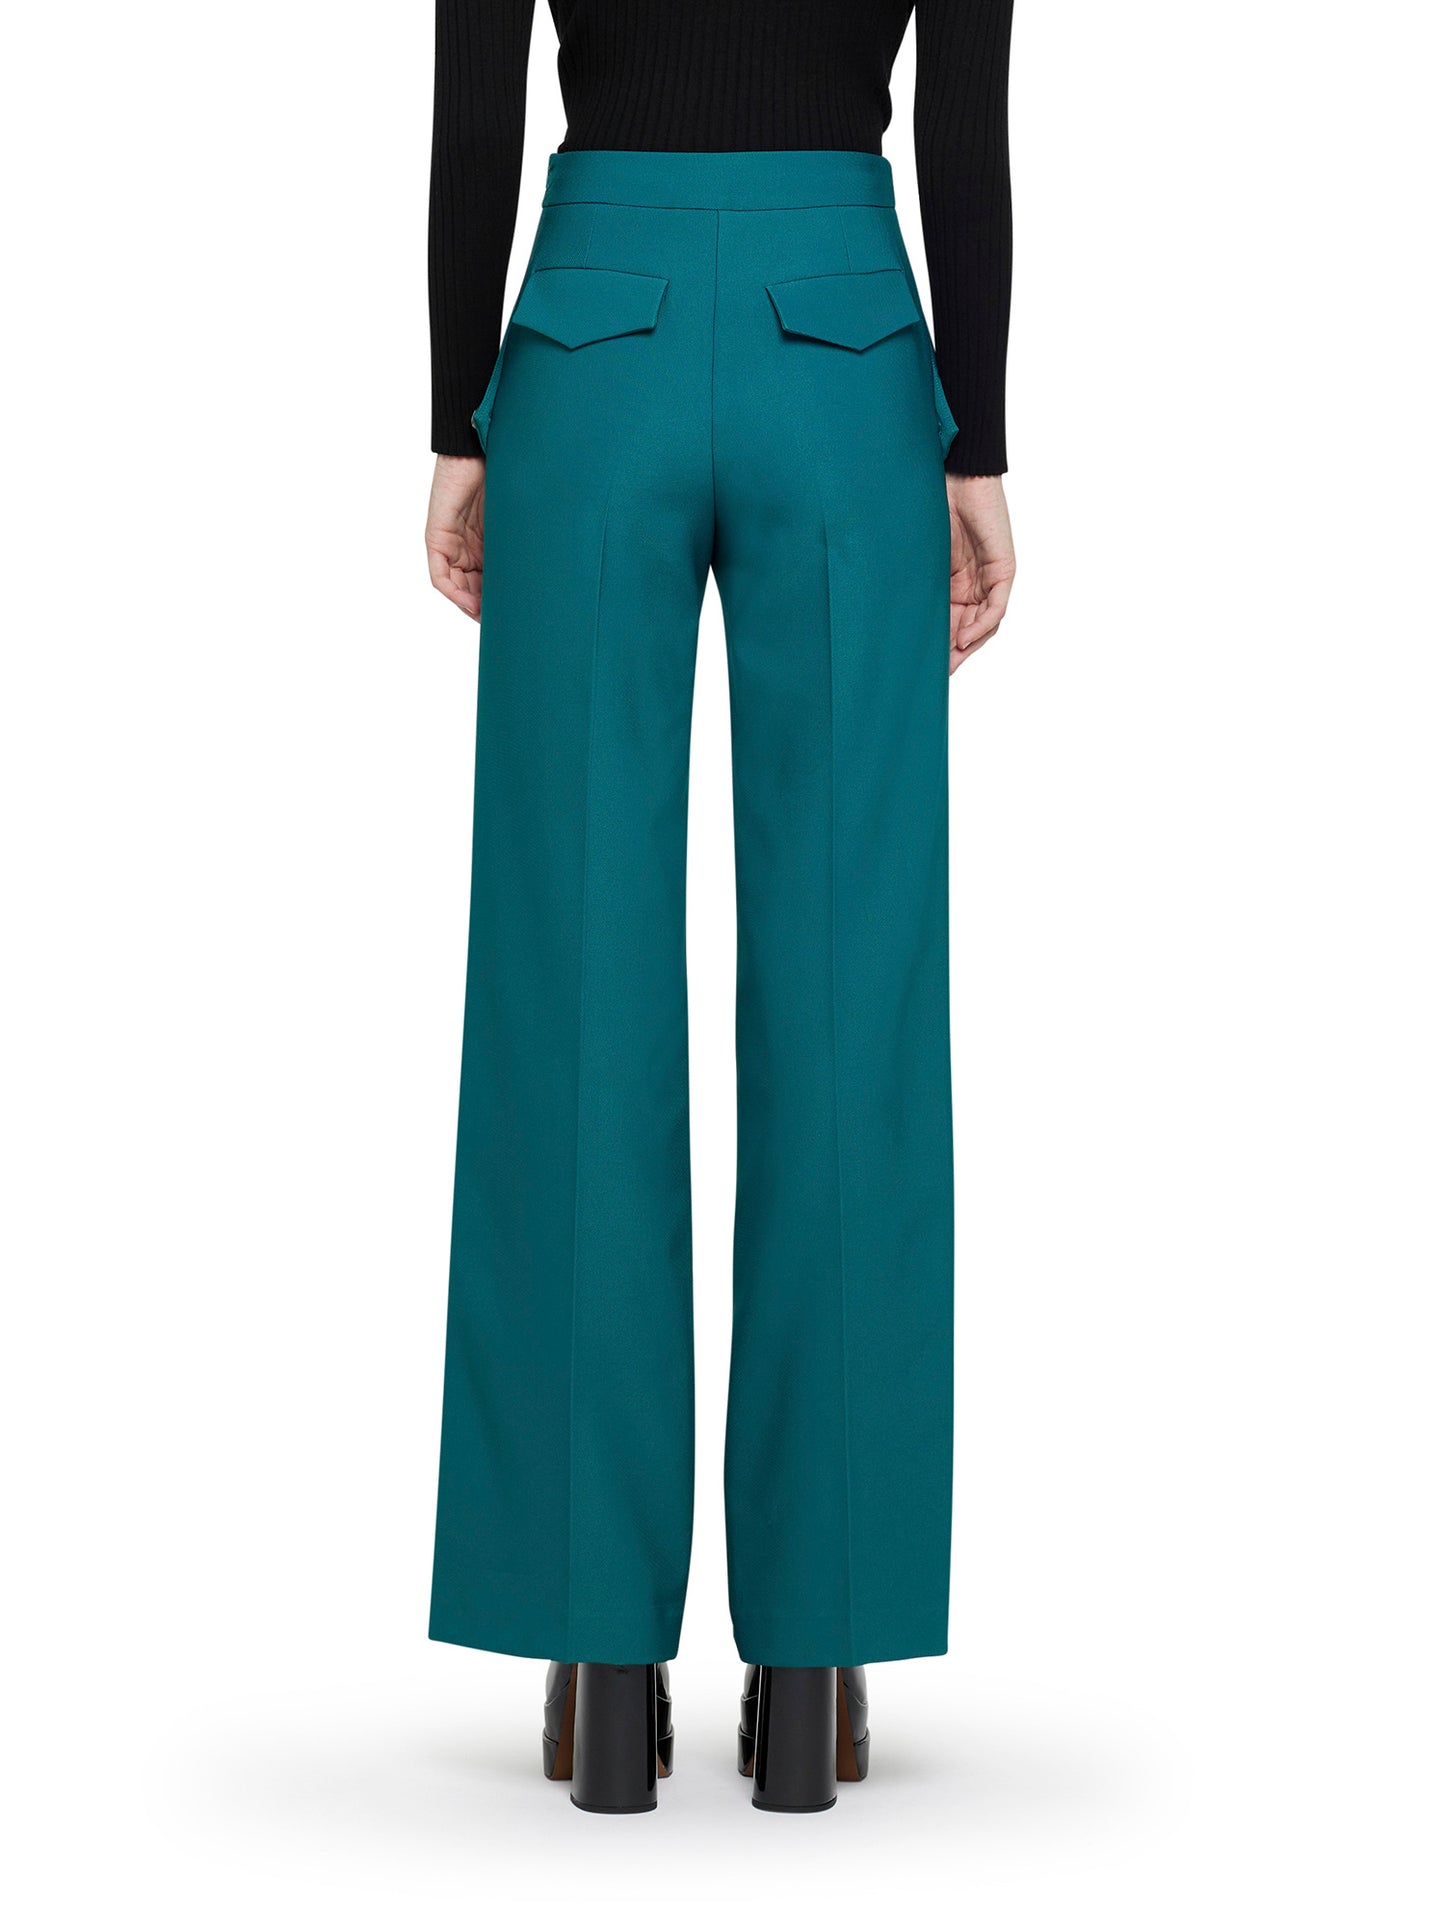 Palazzo trousers with button motif